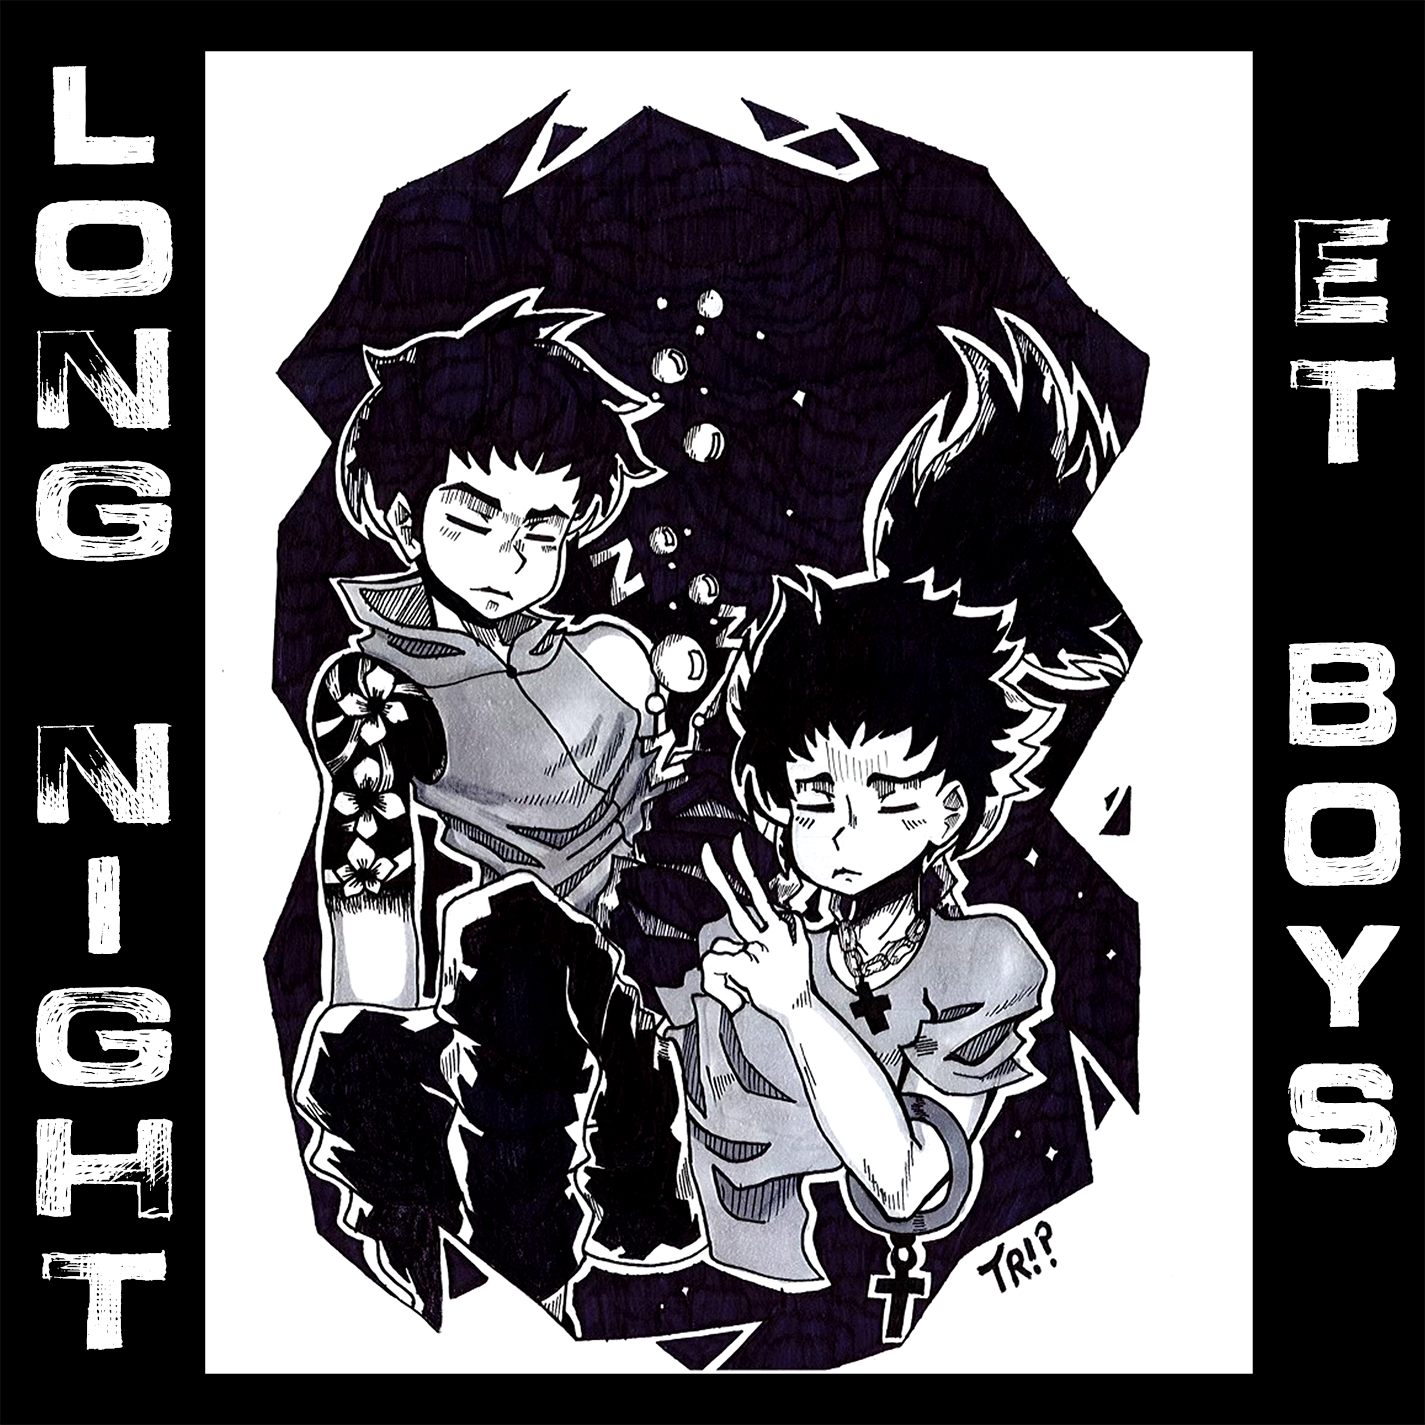 A late night drive with 'Long Night' by ET Boys